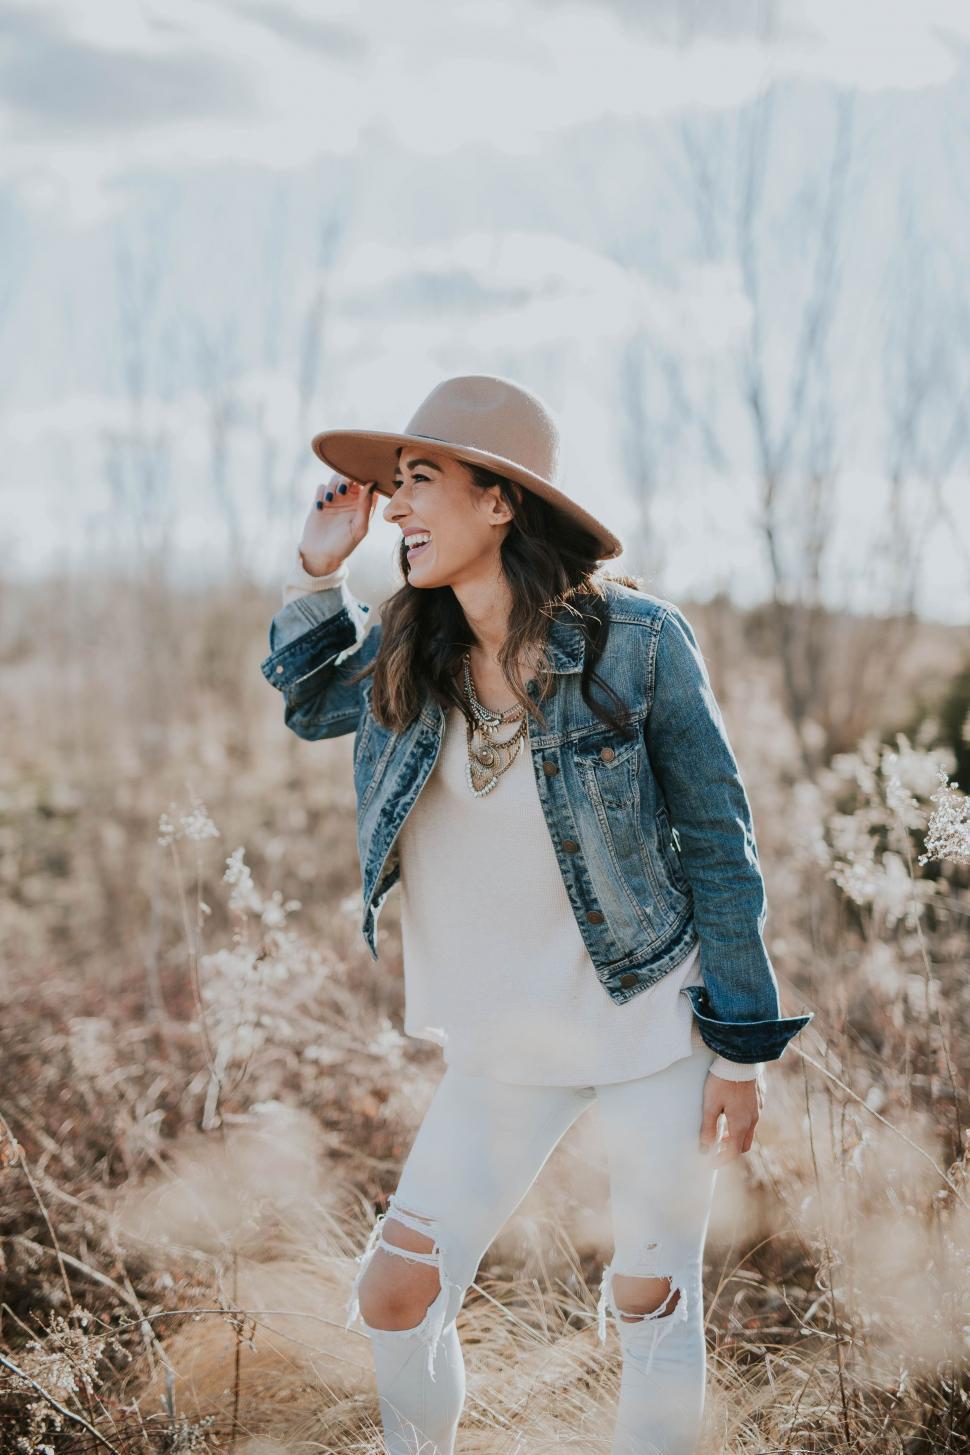 Free Image of Woman Standing in a Field Wearing a Hat 